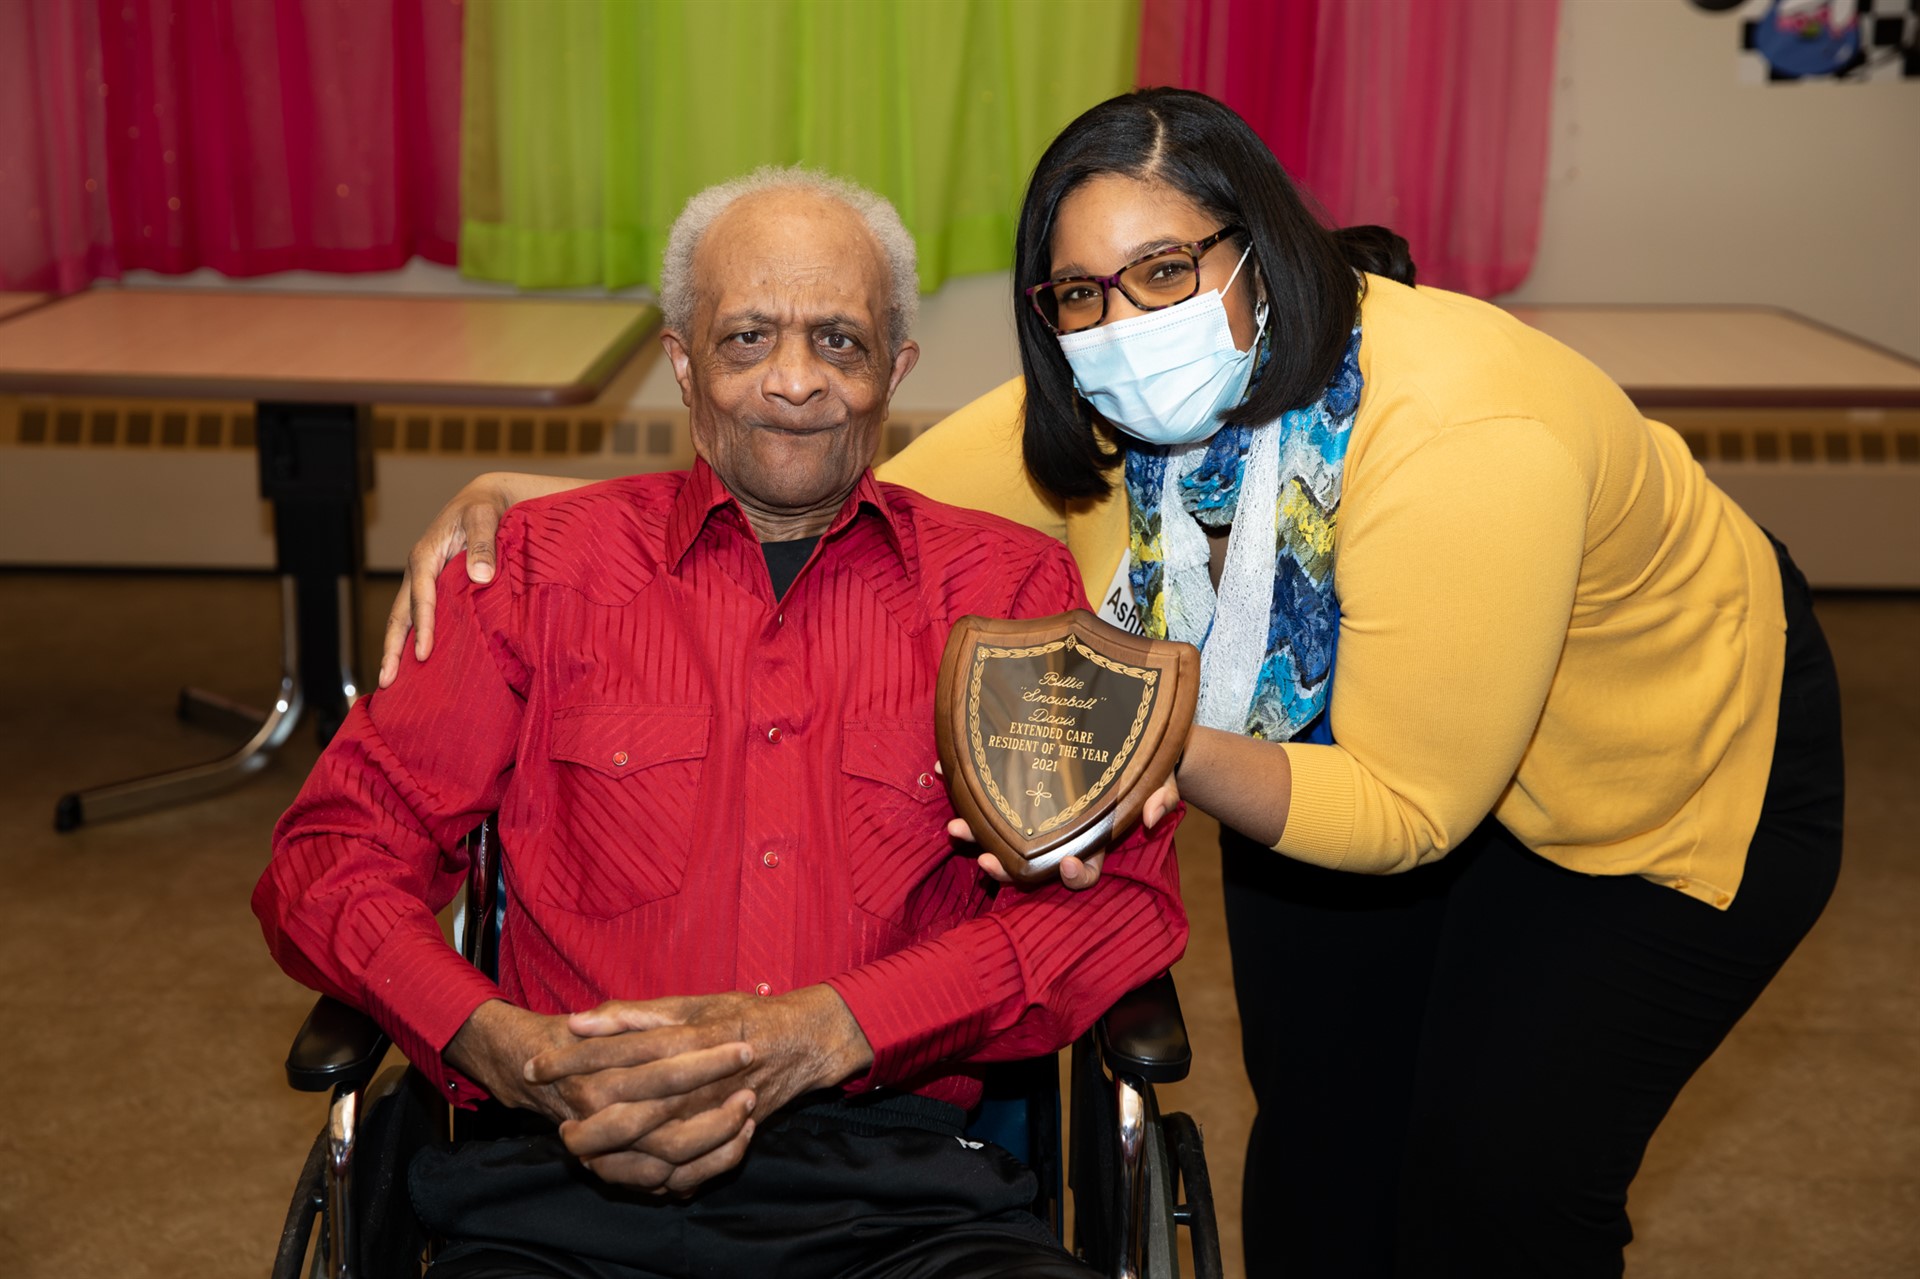 Davis Recognized as Extended Care Resident of the Year